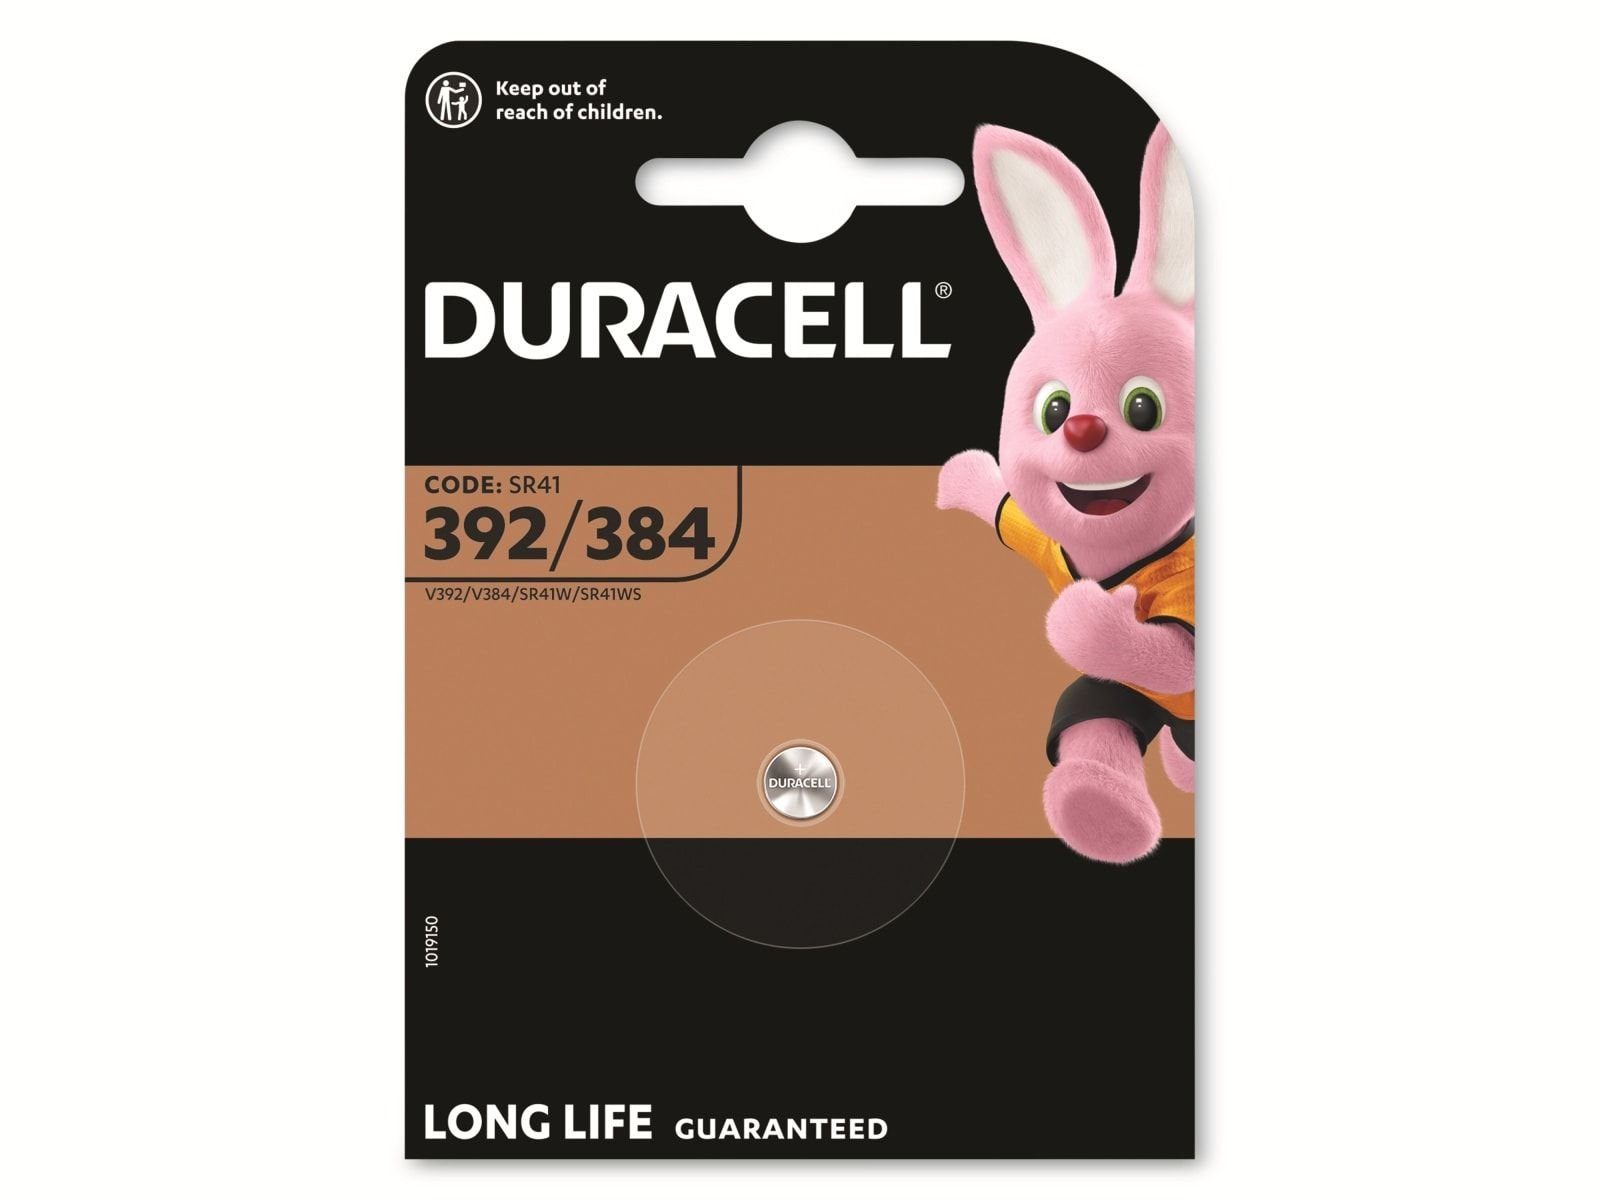 Duracell DURACELL Silver Oxide-Knopfzelle SR41, 1.5V, Watch Knopfzelle